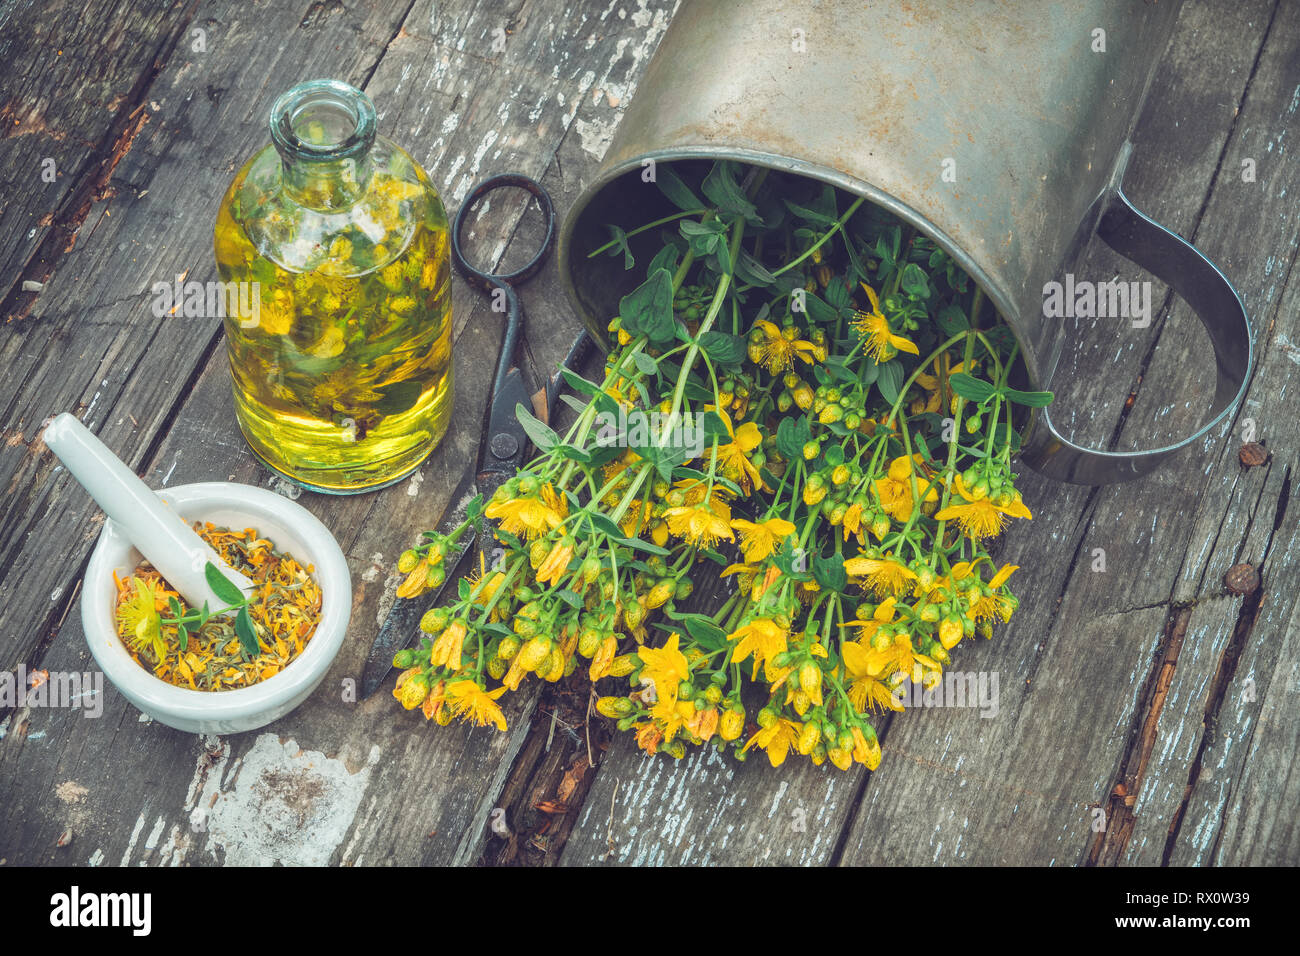 Hypericum - St Johns wort plants, oil or infusion bottle, mortar on wooden board, top view. Stock Photo